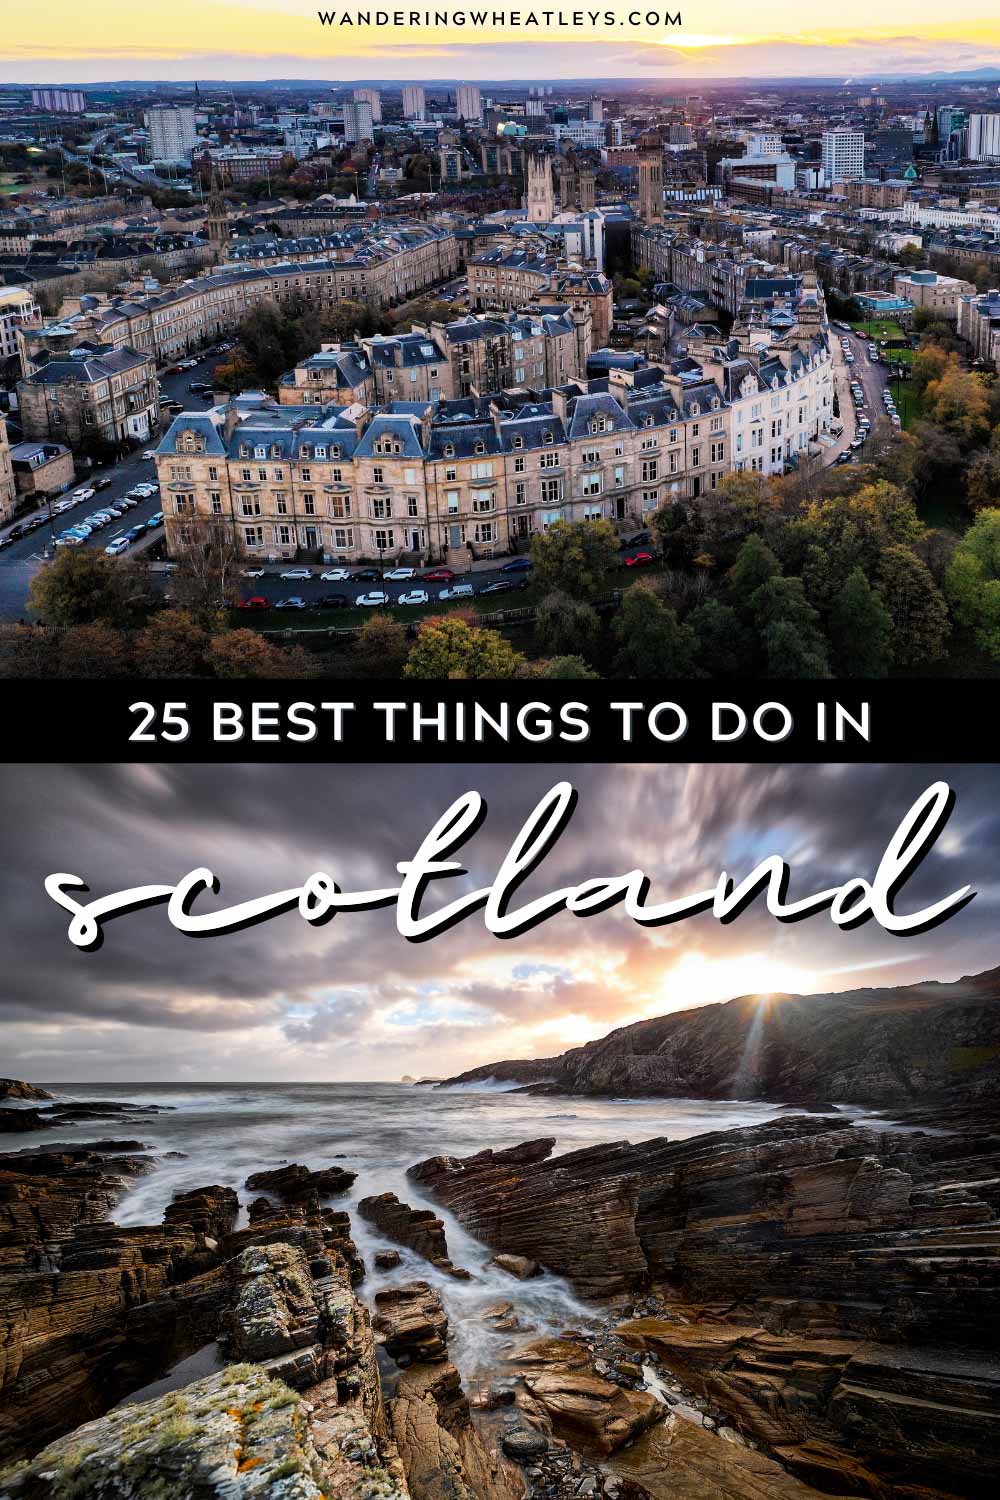 The Best Things to do in Scotland